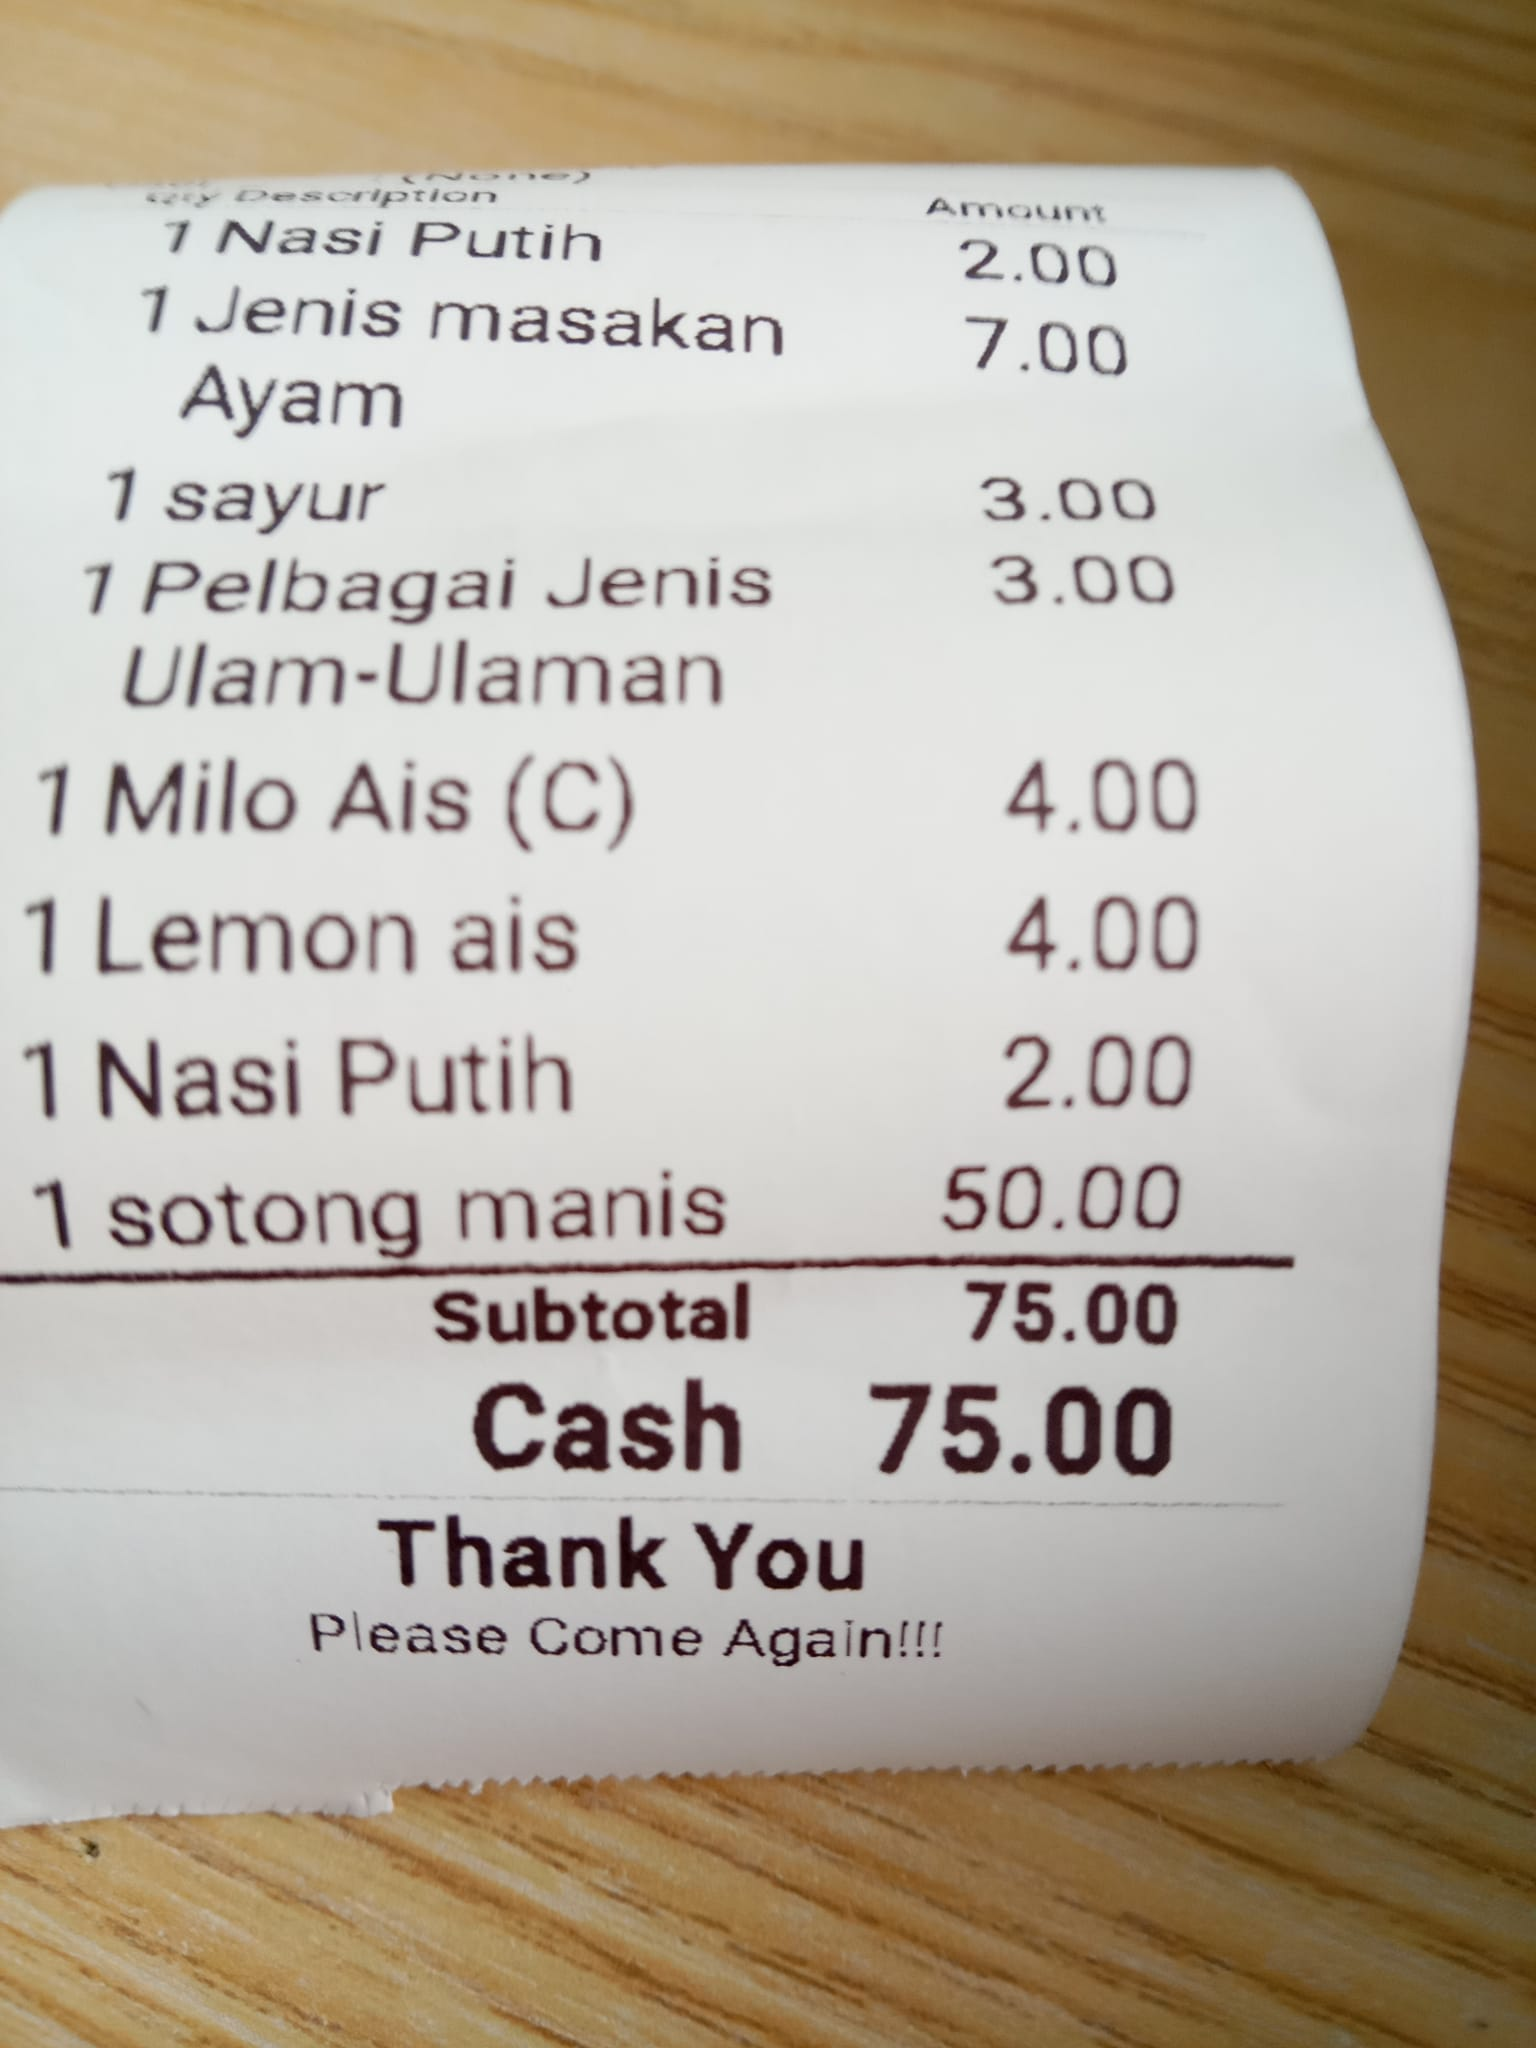 Receipt showing rm50 for each piece of squid